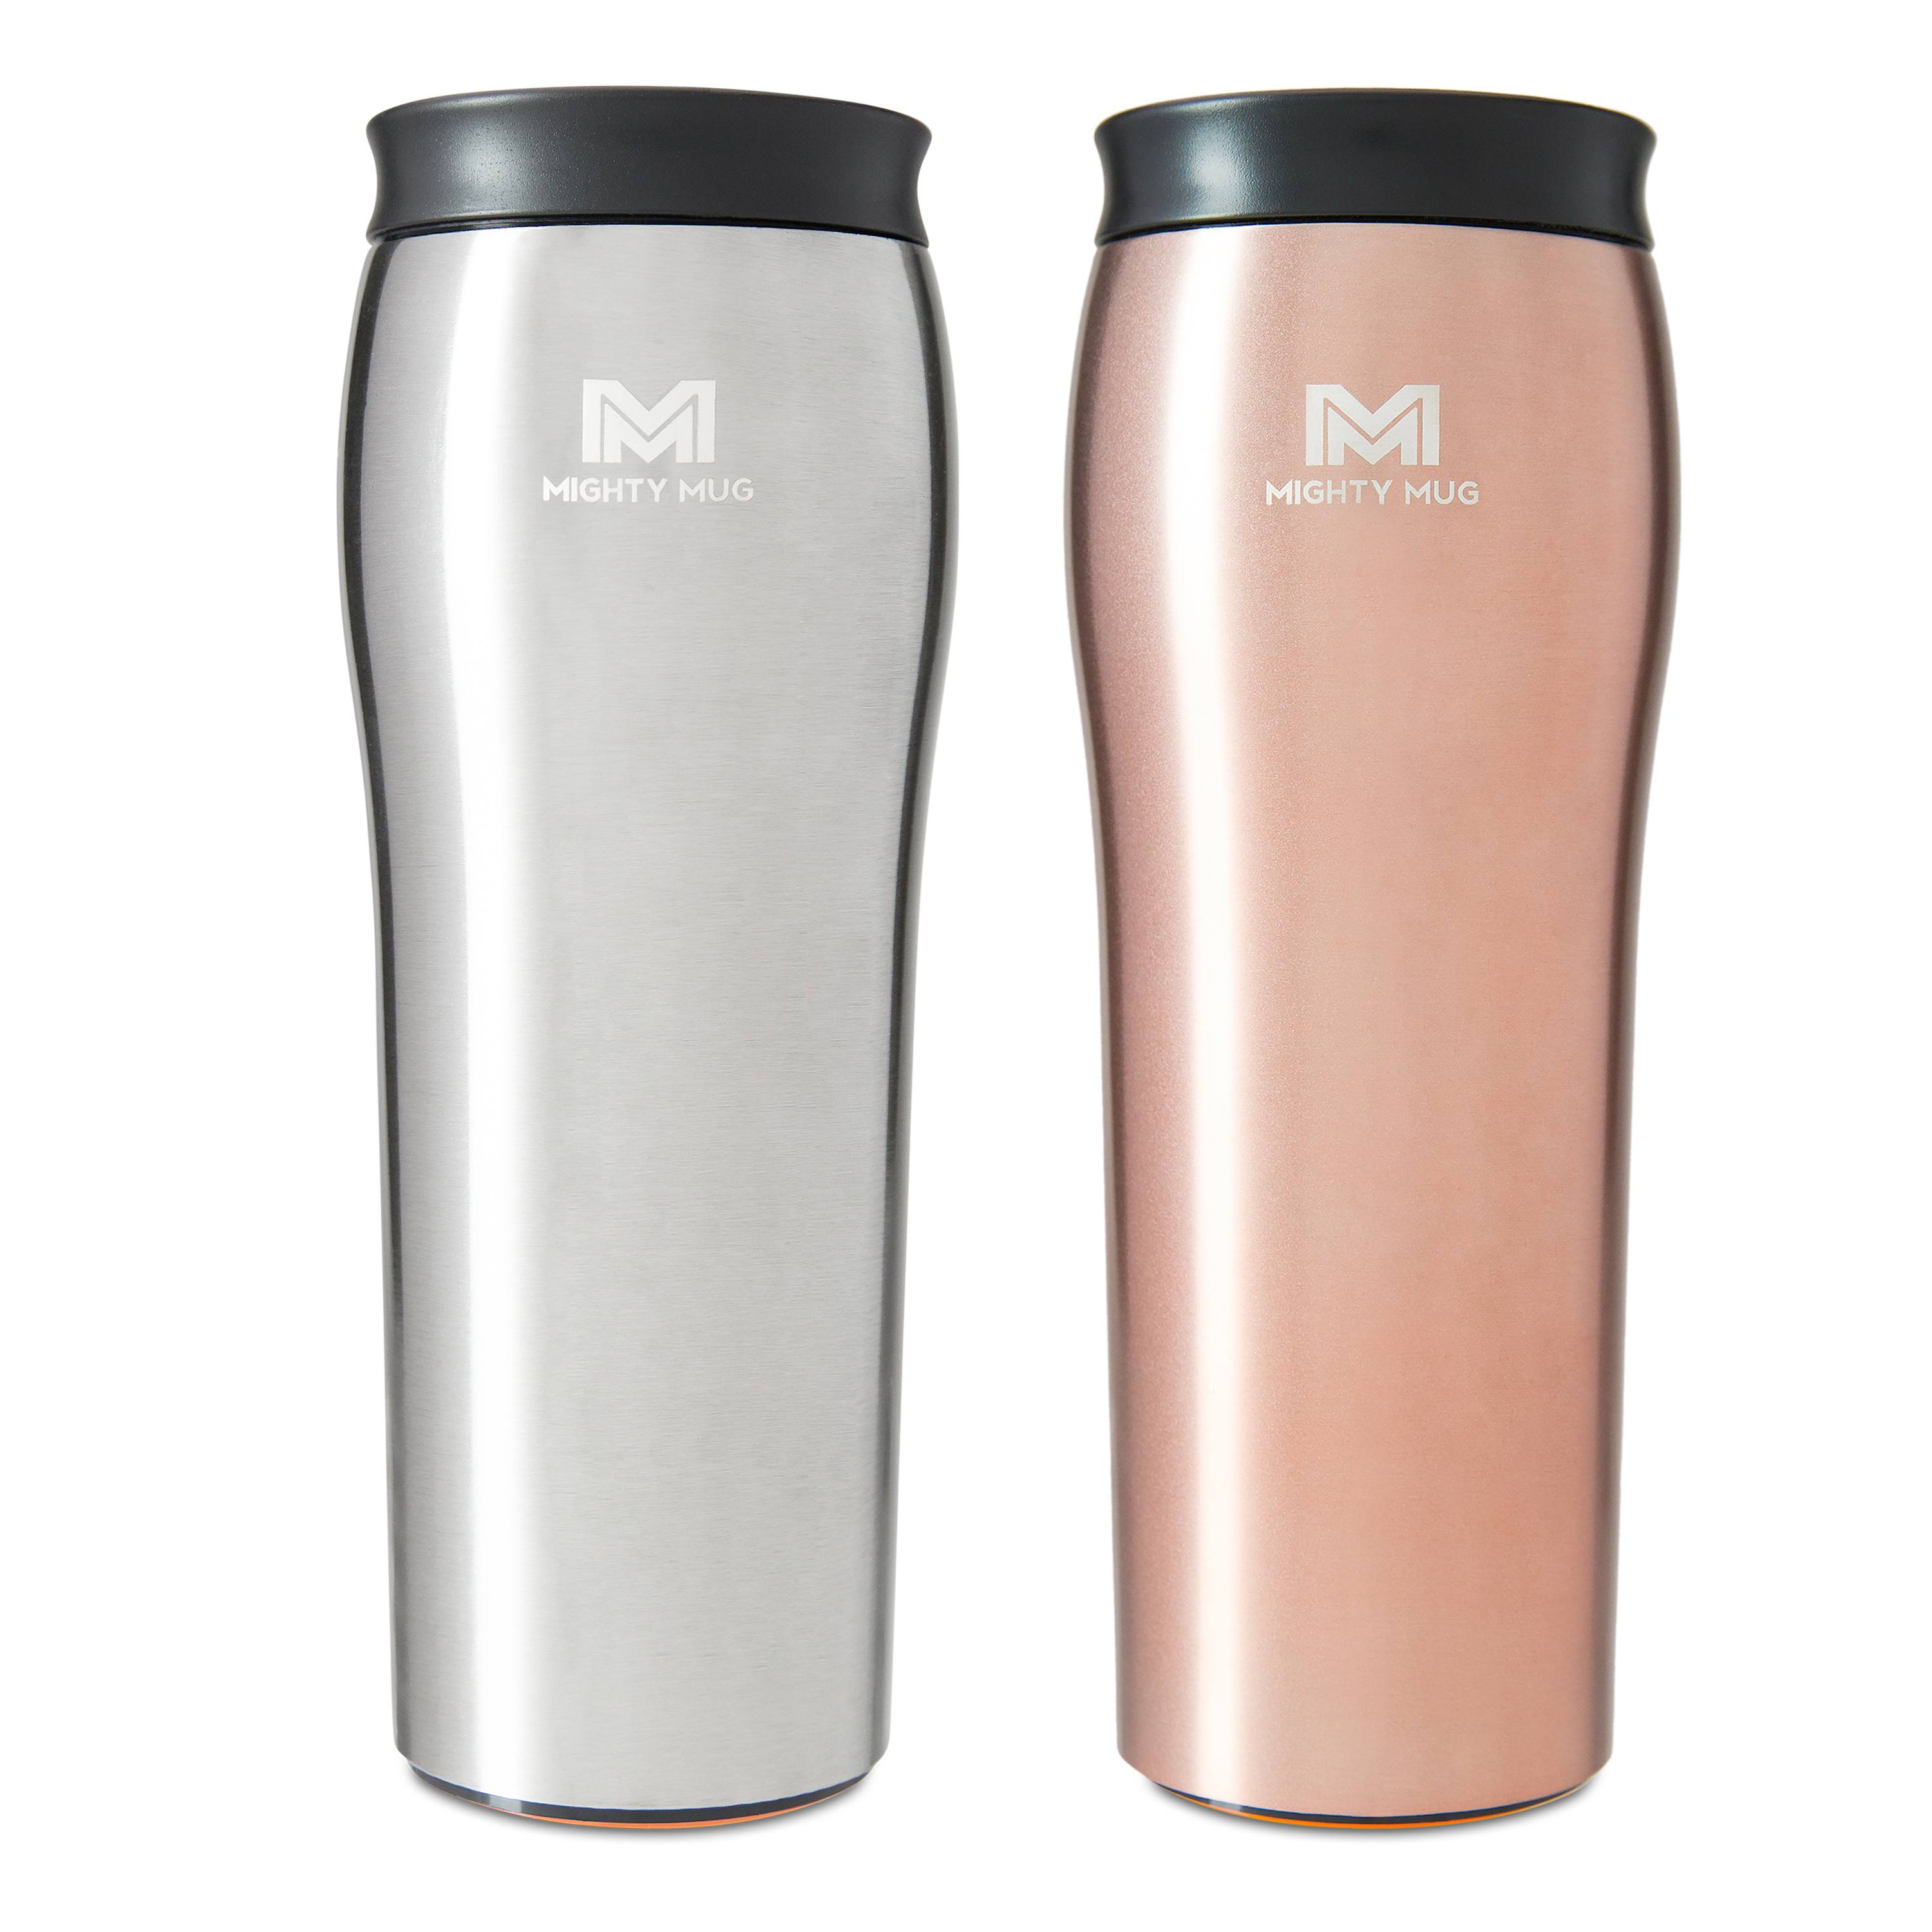  Mighty Mug, The Untippable Mug, Grips When Hit, Lifts for  Sips, Insulated Stainless Steel Tumbler, Cupholder Friendly, Gifts for  Women Men All, Leakproof